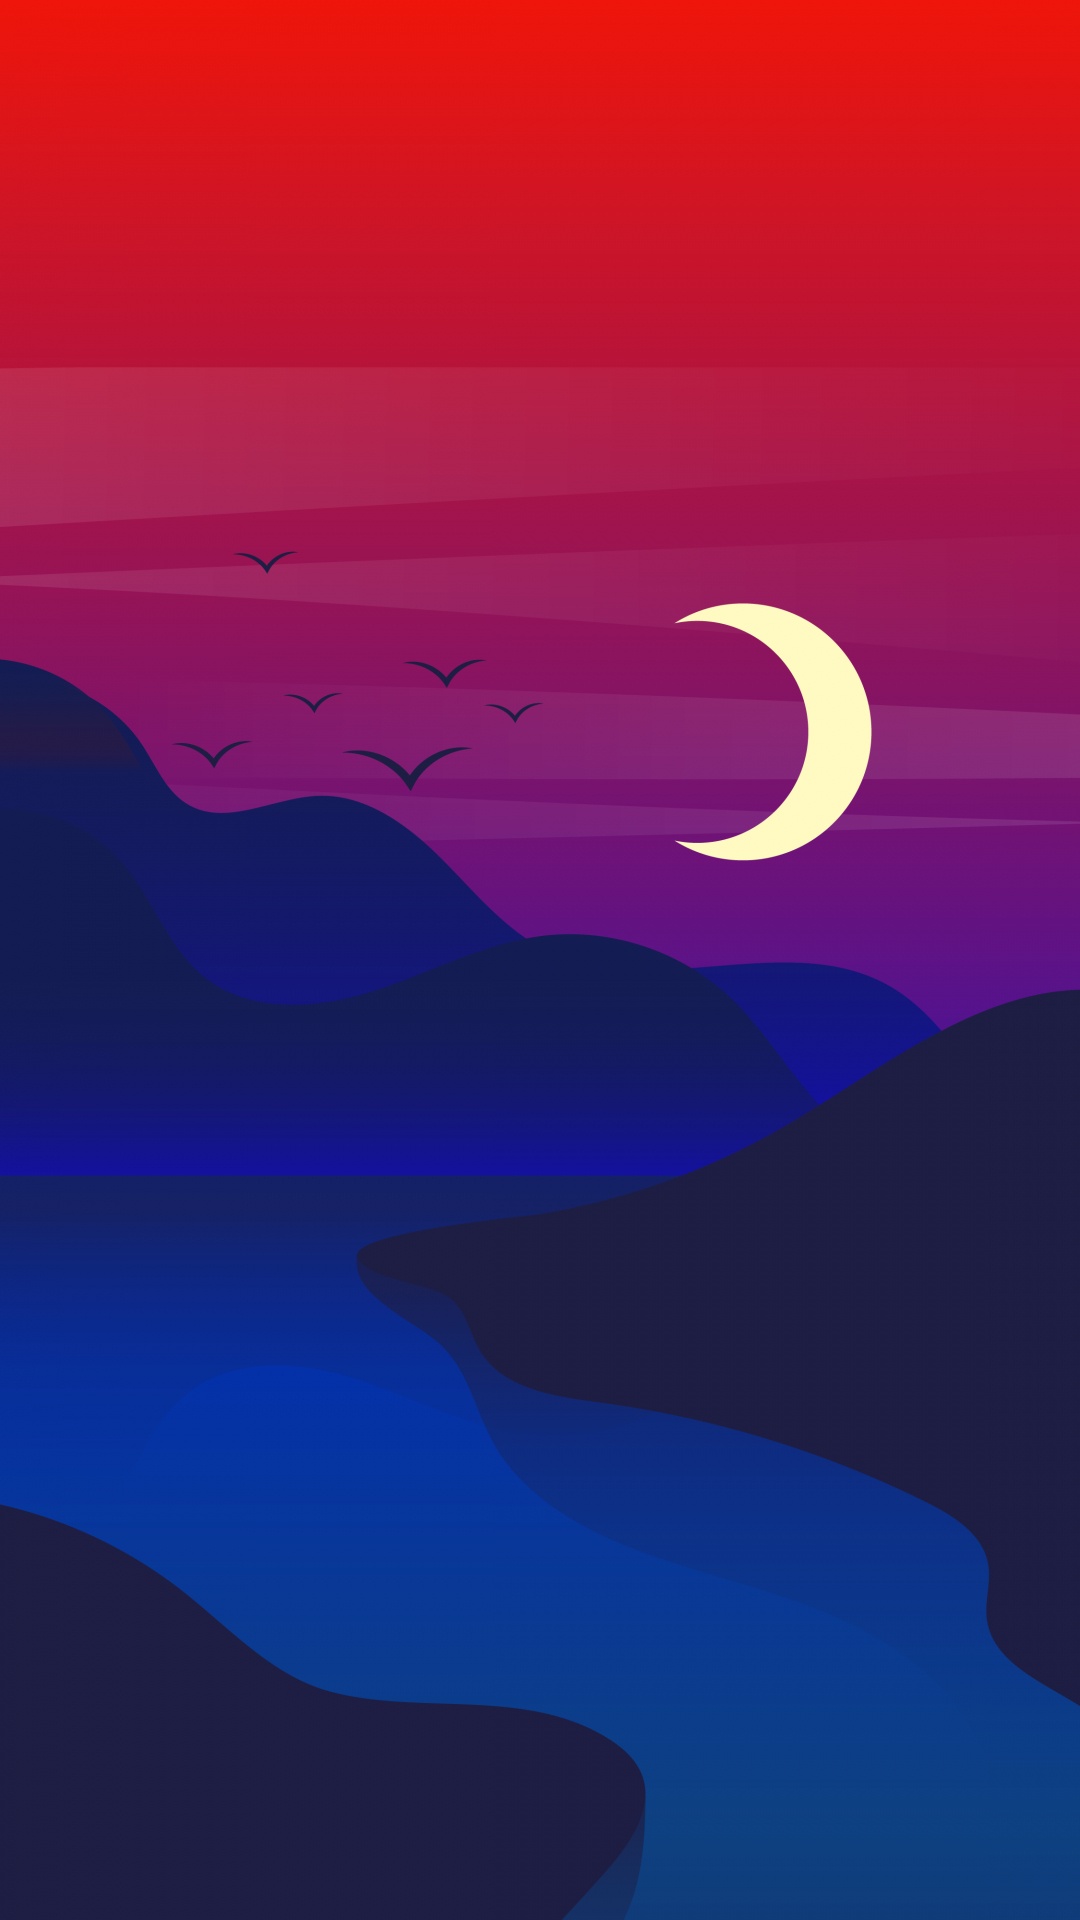 Tablet, Ambiente, Luna, Afterglow, Atardecer. Wallpaper in 1080x1920 Resolution